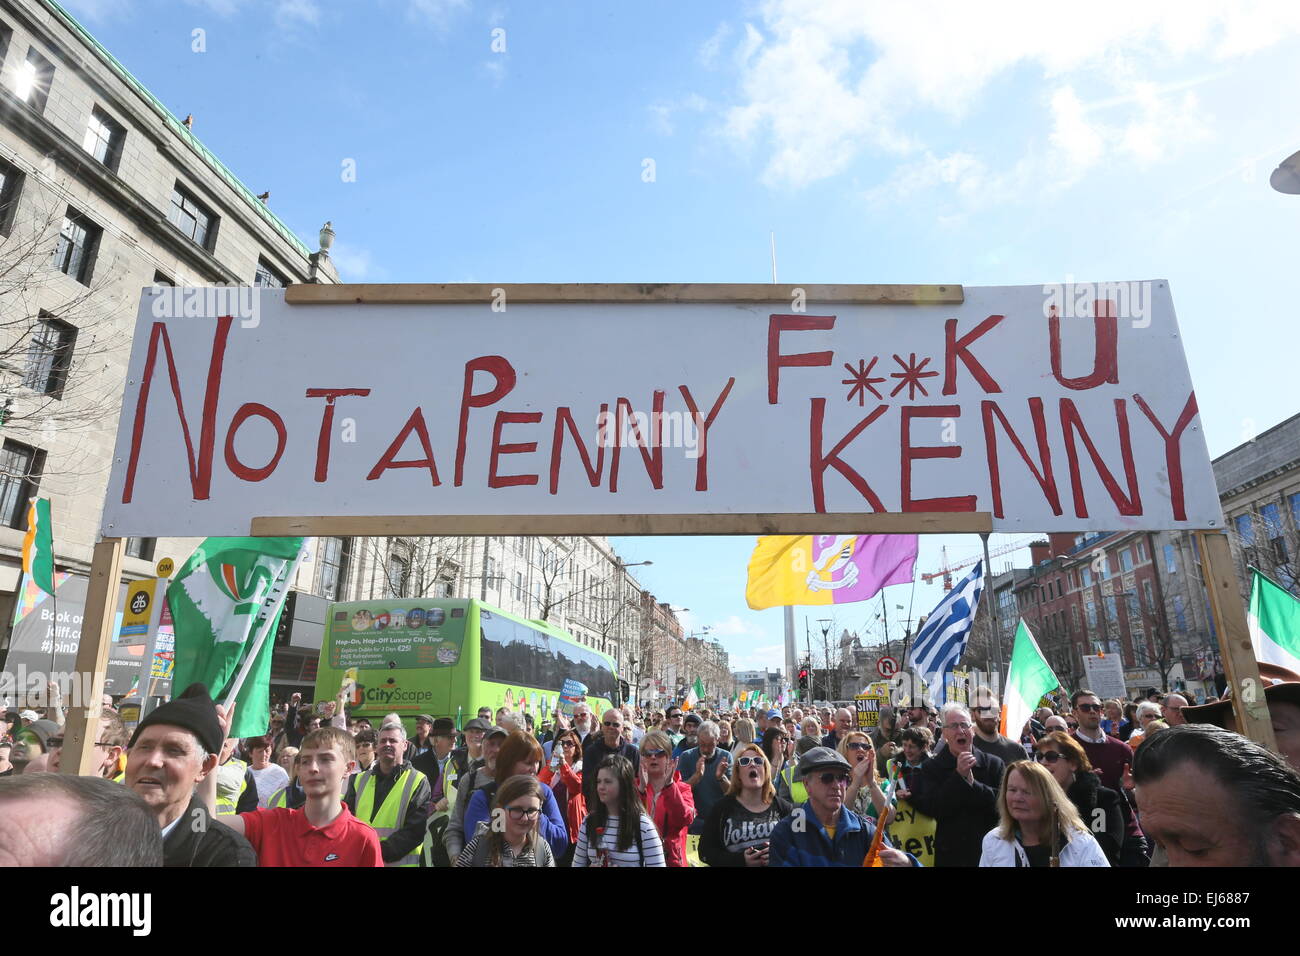 A sign criticising Taoiseach Enda Kenny. Image from the anti-water charges Right2Water protest in Dublin city centre. Stock Photo